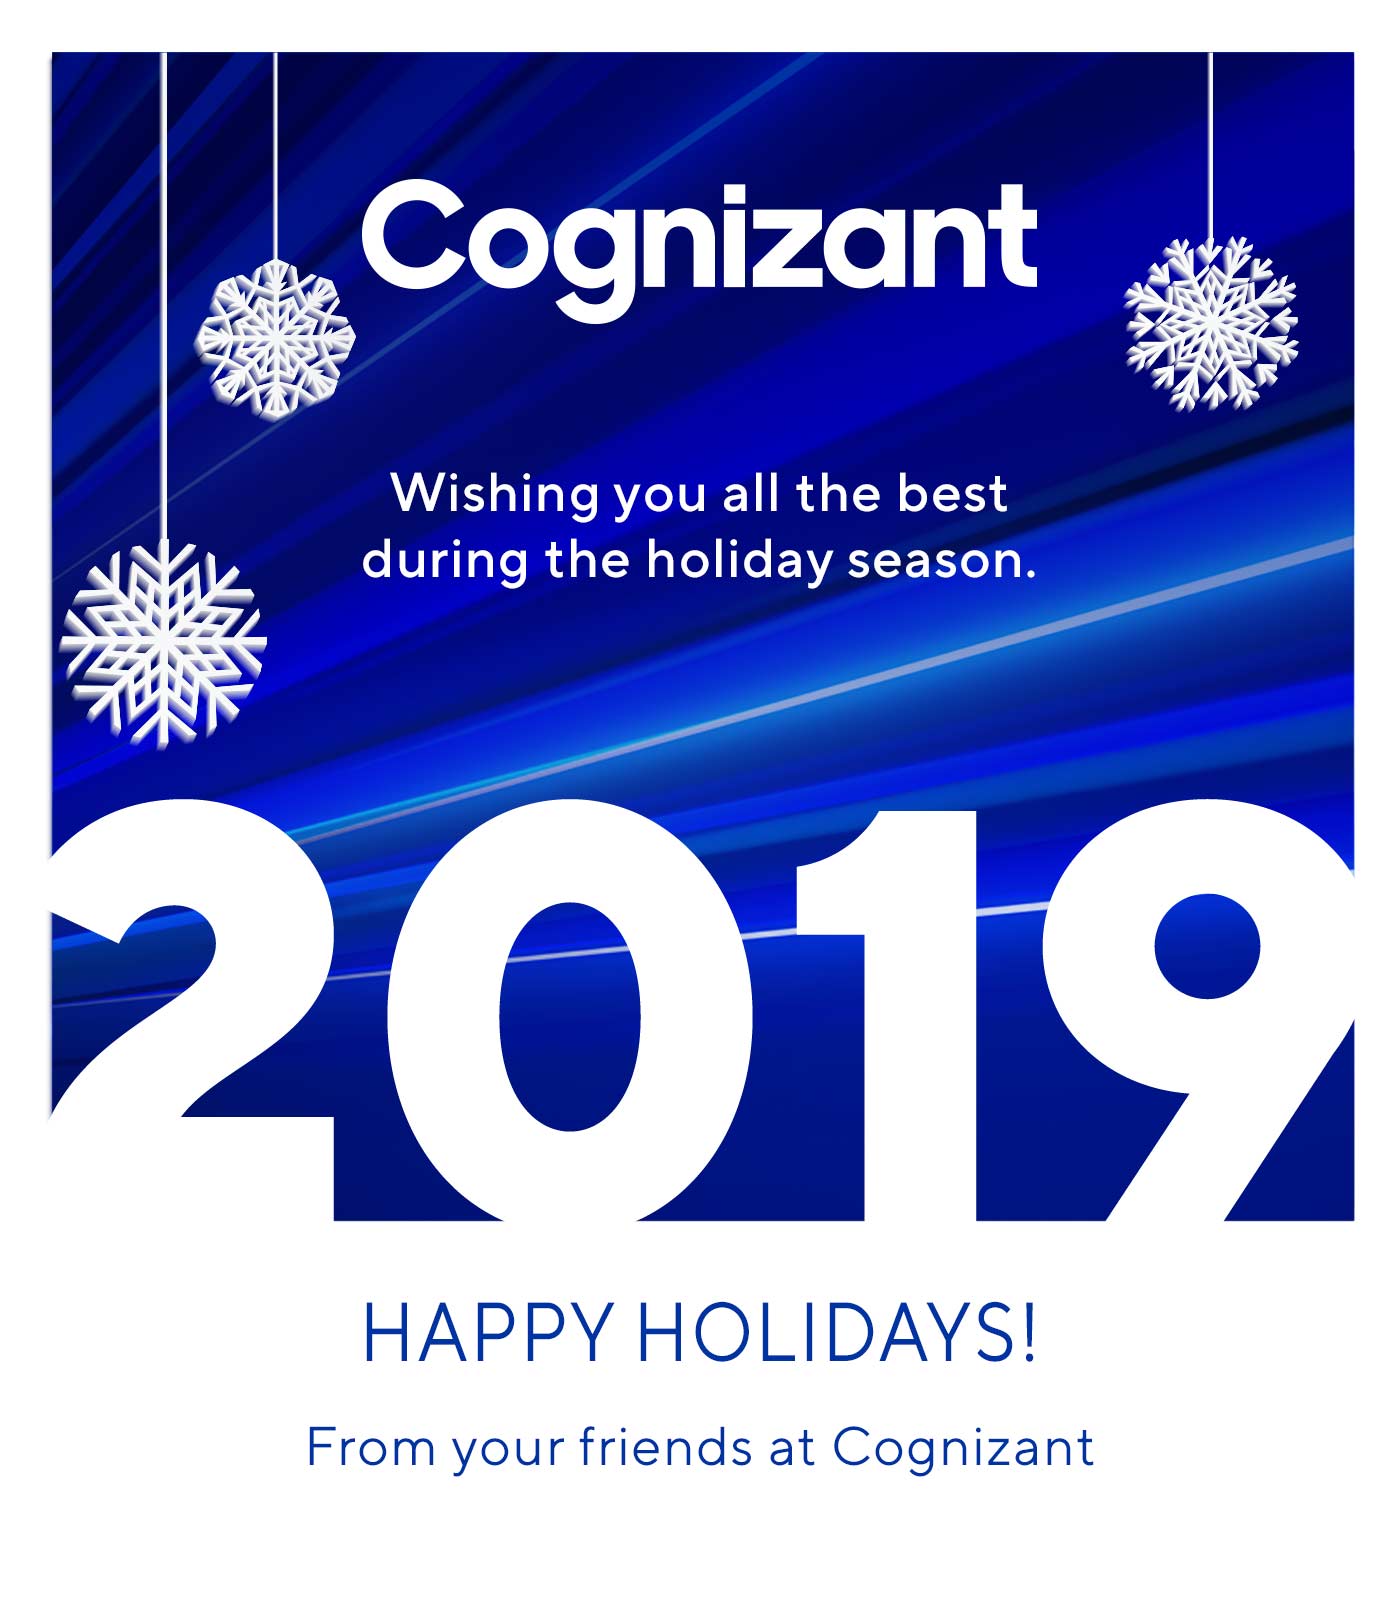 Cognizant Wishing You the Best